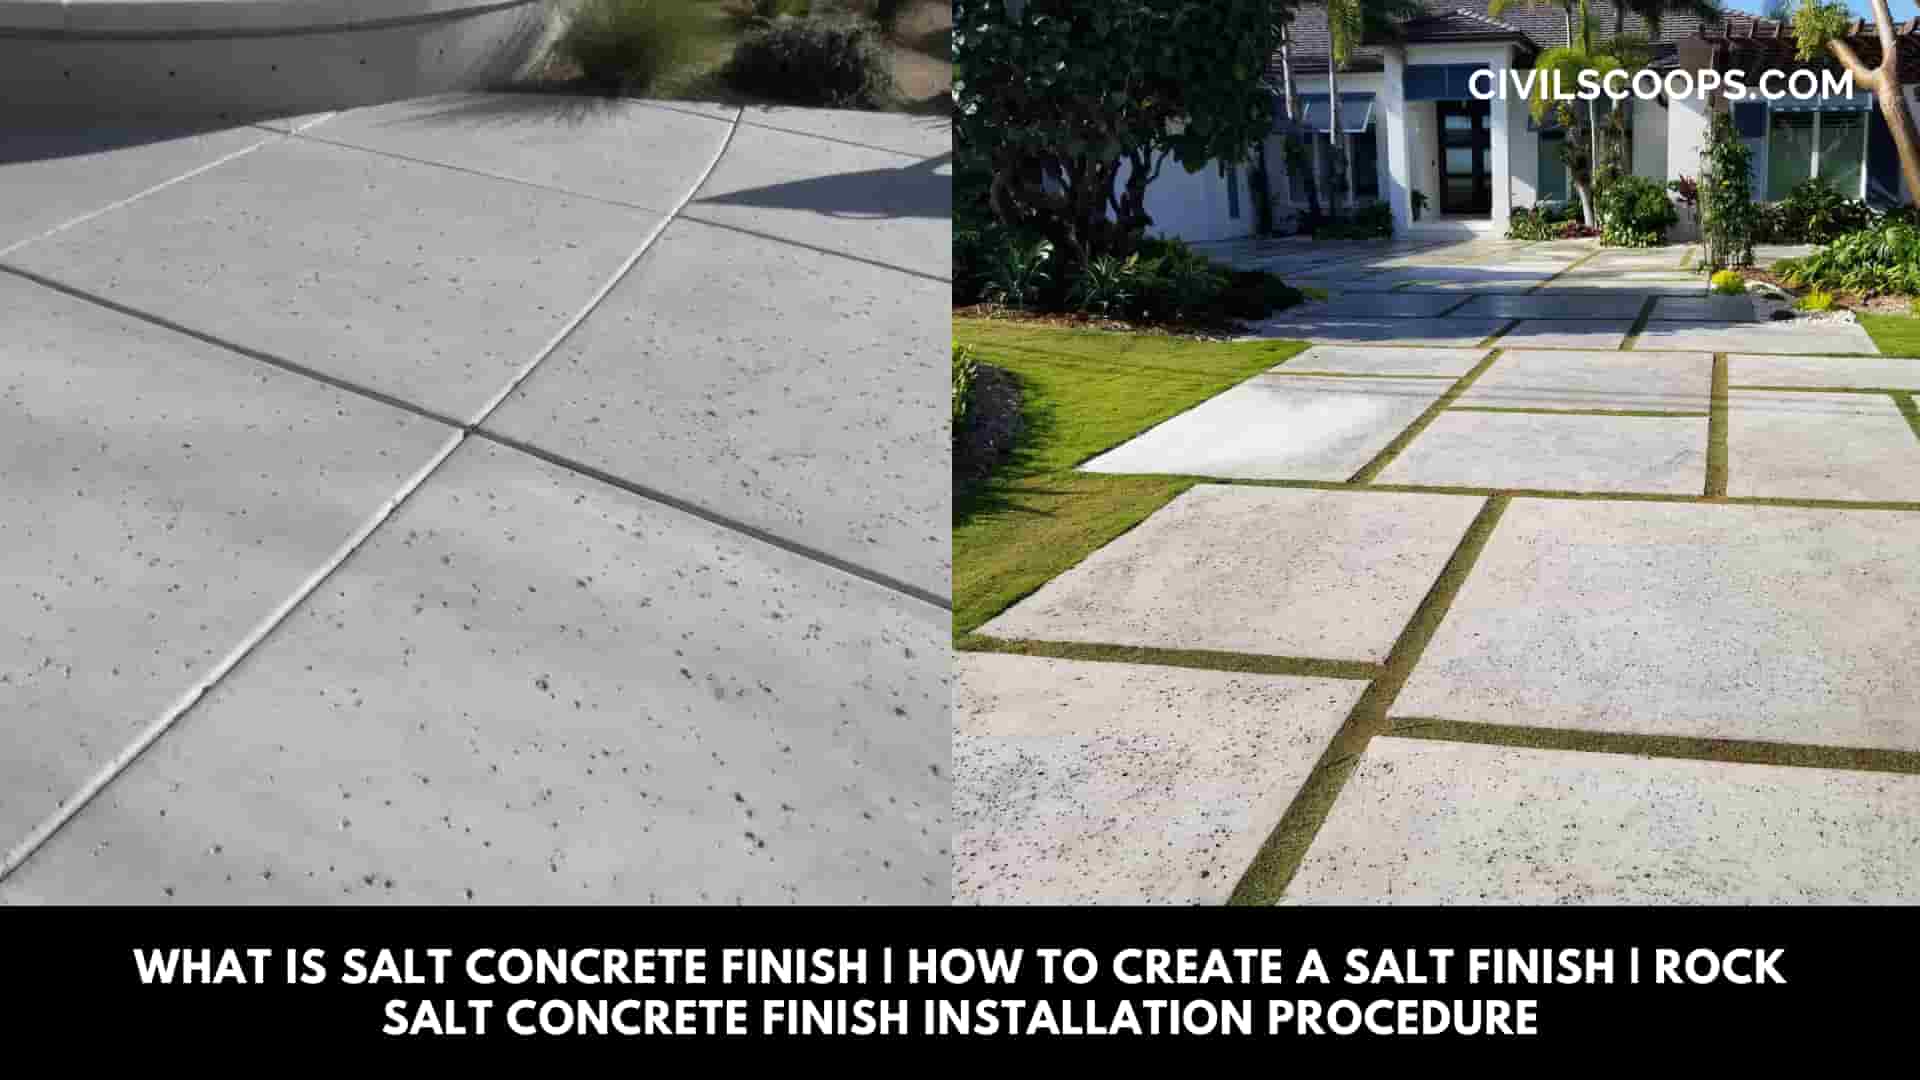 What Is Salt Concrete Finish | How to Create a Salt Finish | Rock Salt Concrete Finish Installation Procedure